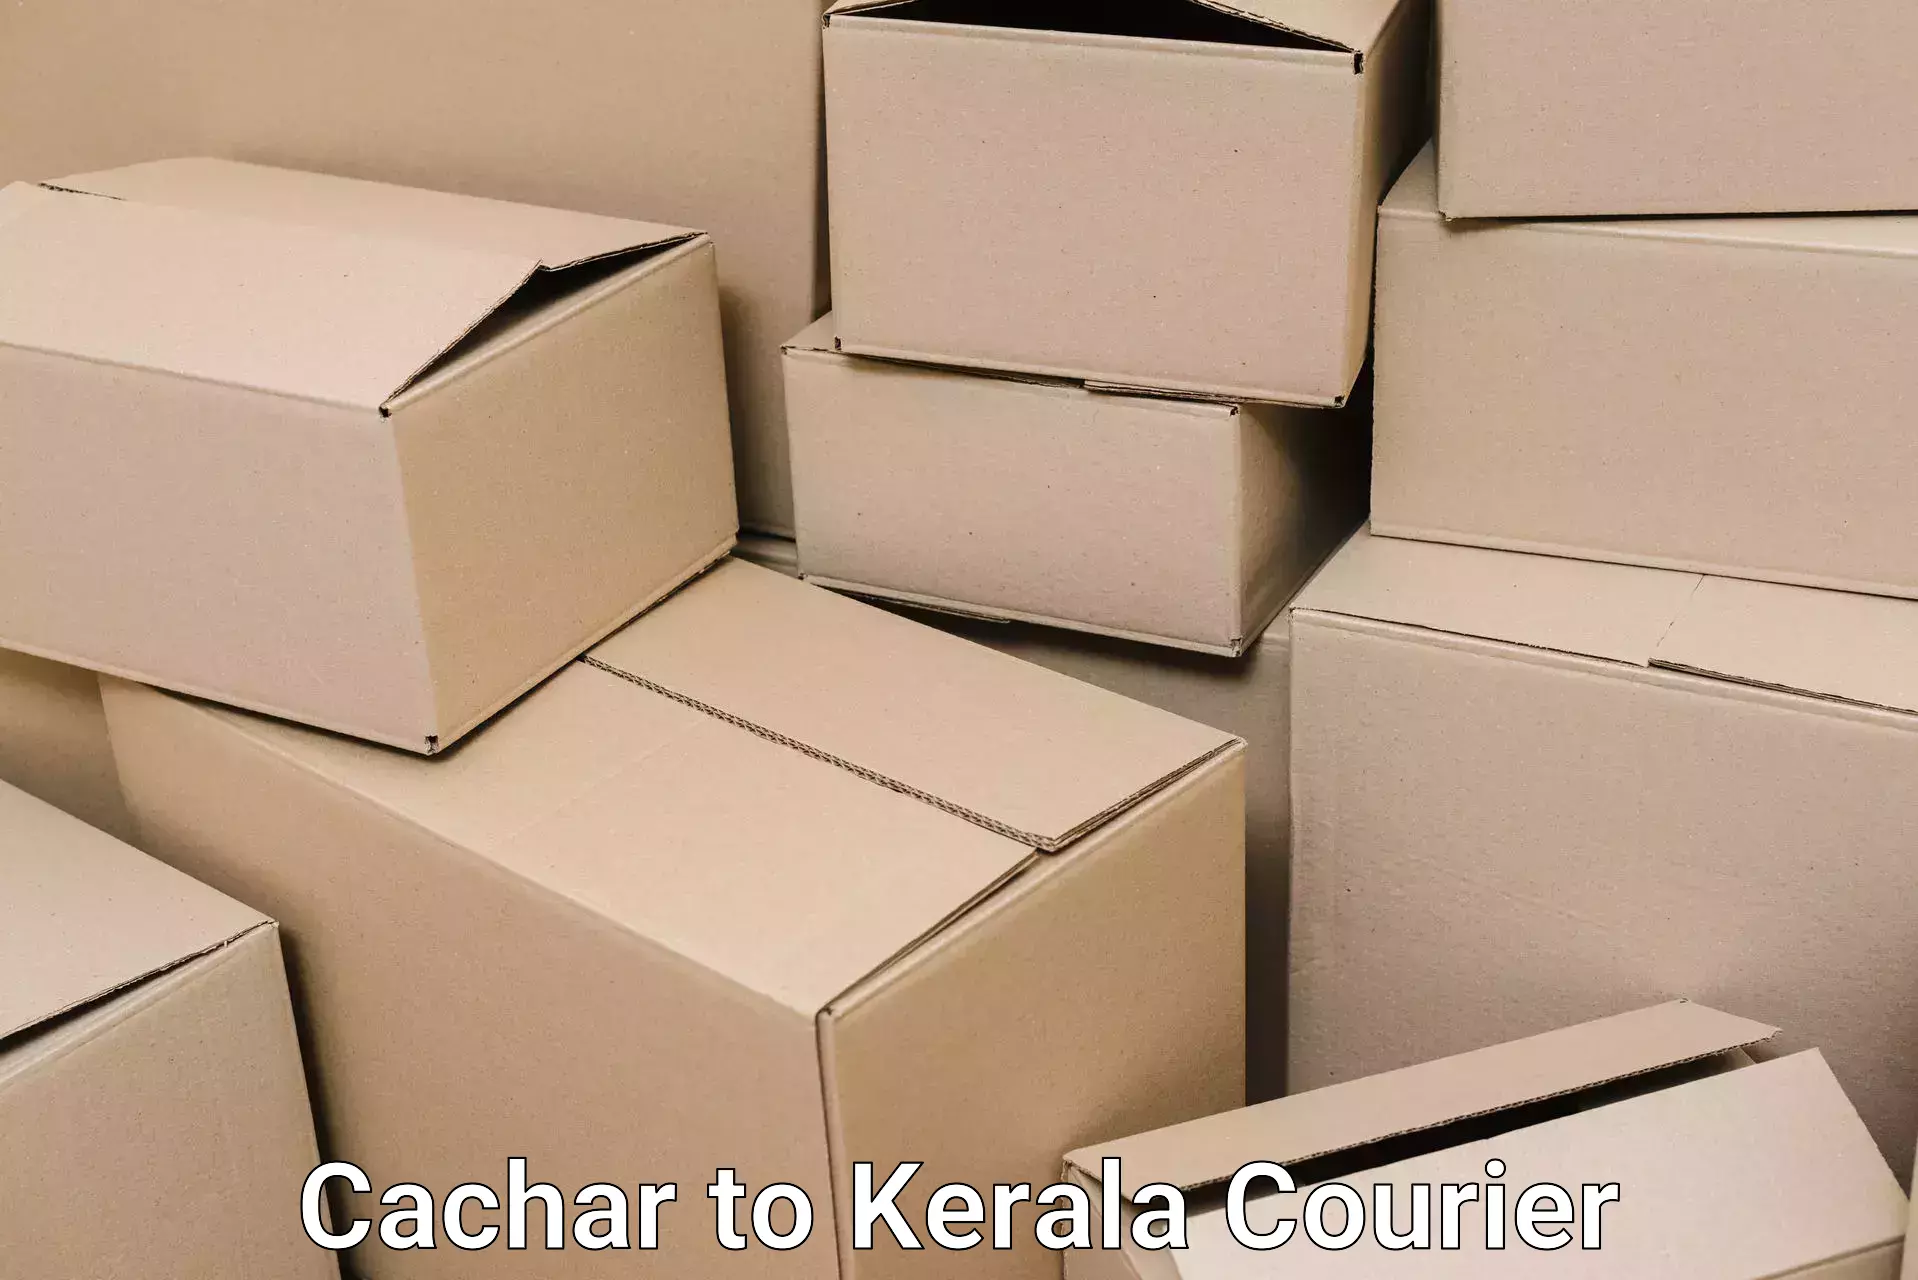 Home goods transport Cachar to Kerala